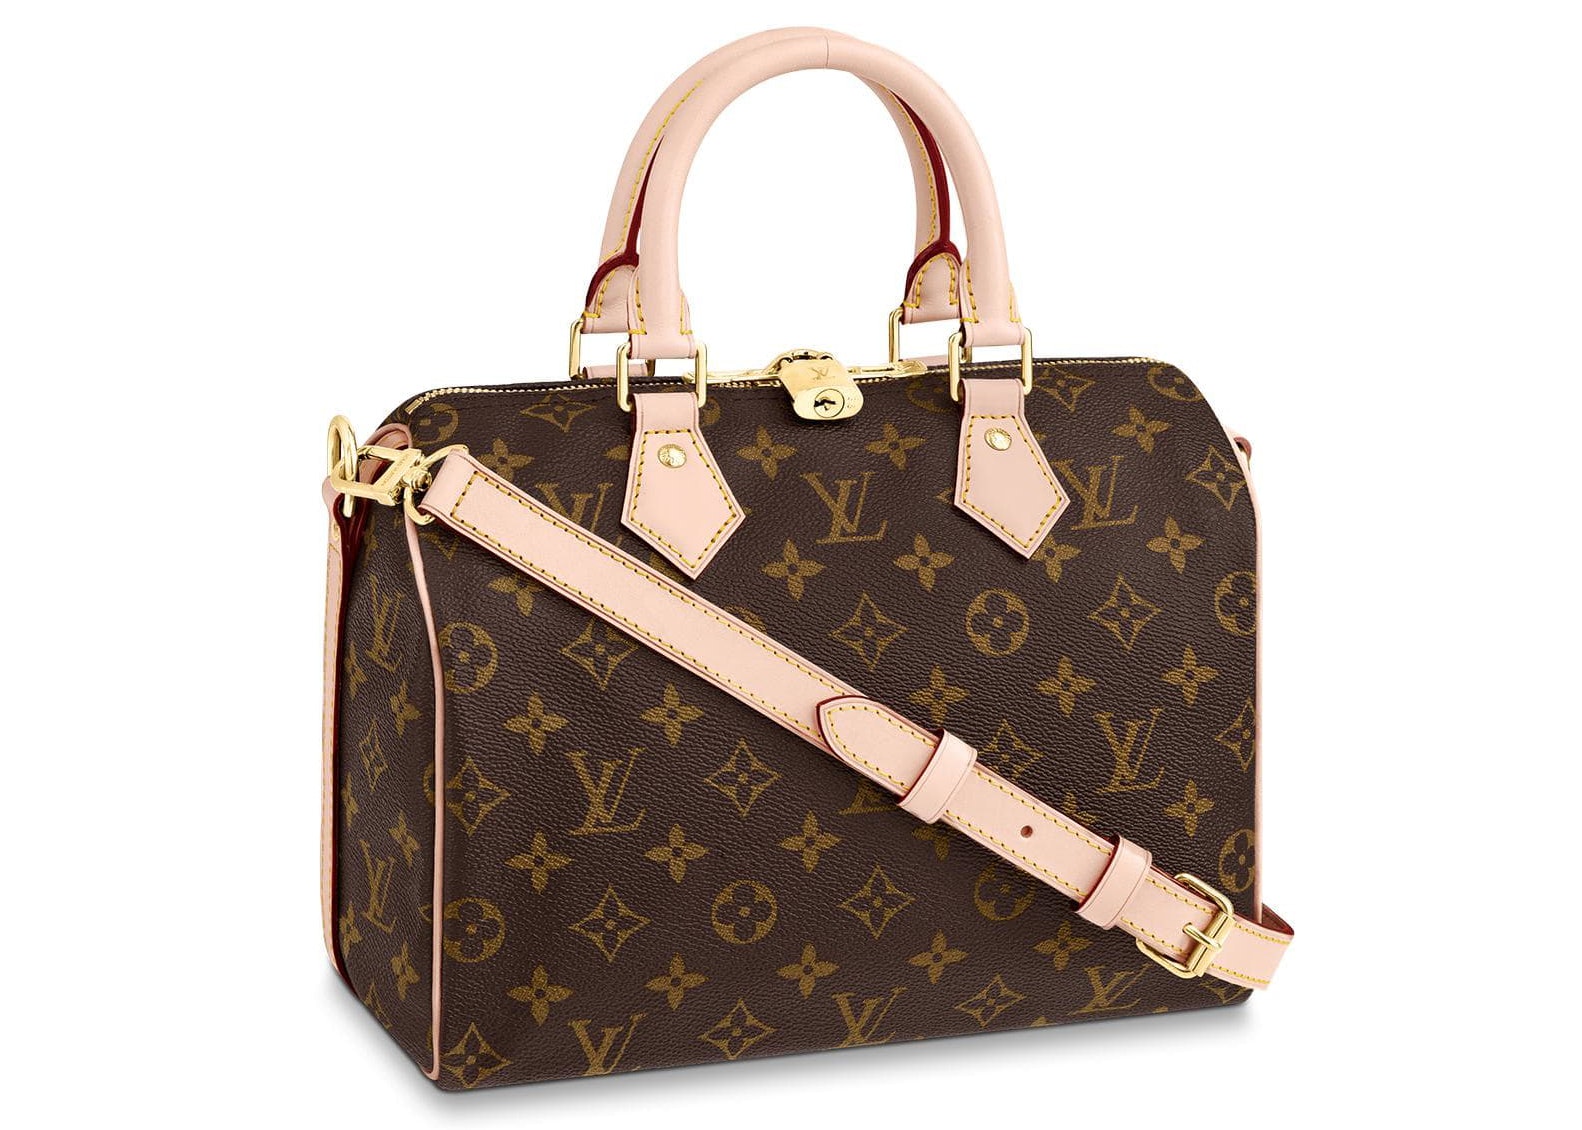 The Ultimate Reference Guide to the Louis Vuitton Speedy  Academy by  FASHIONPHILE